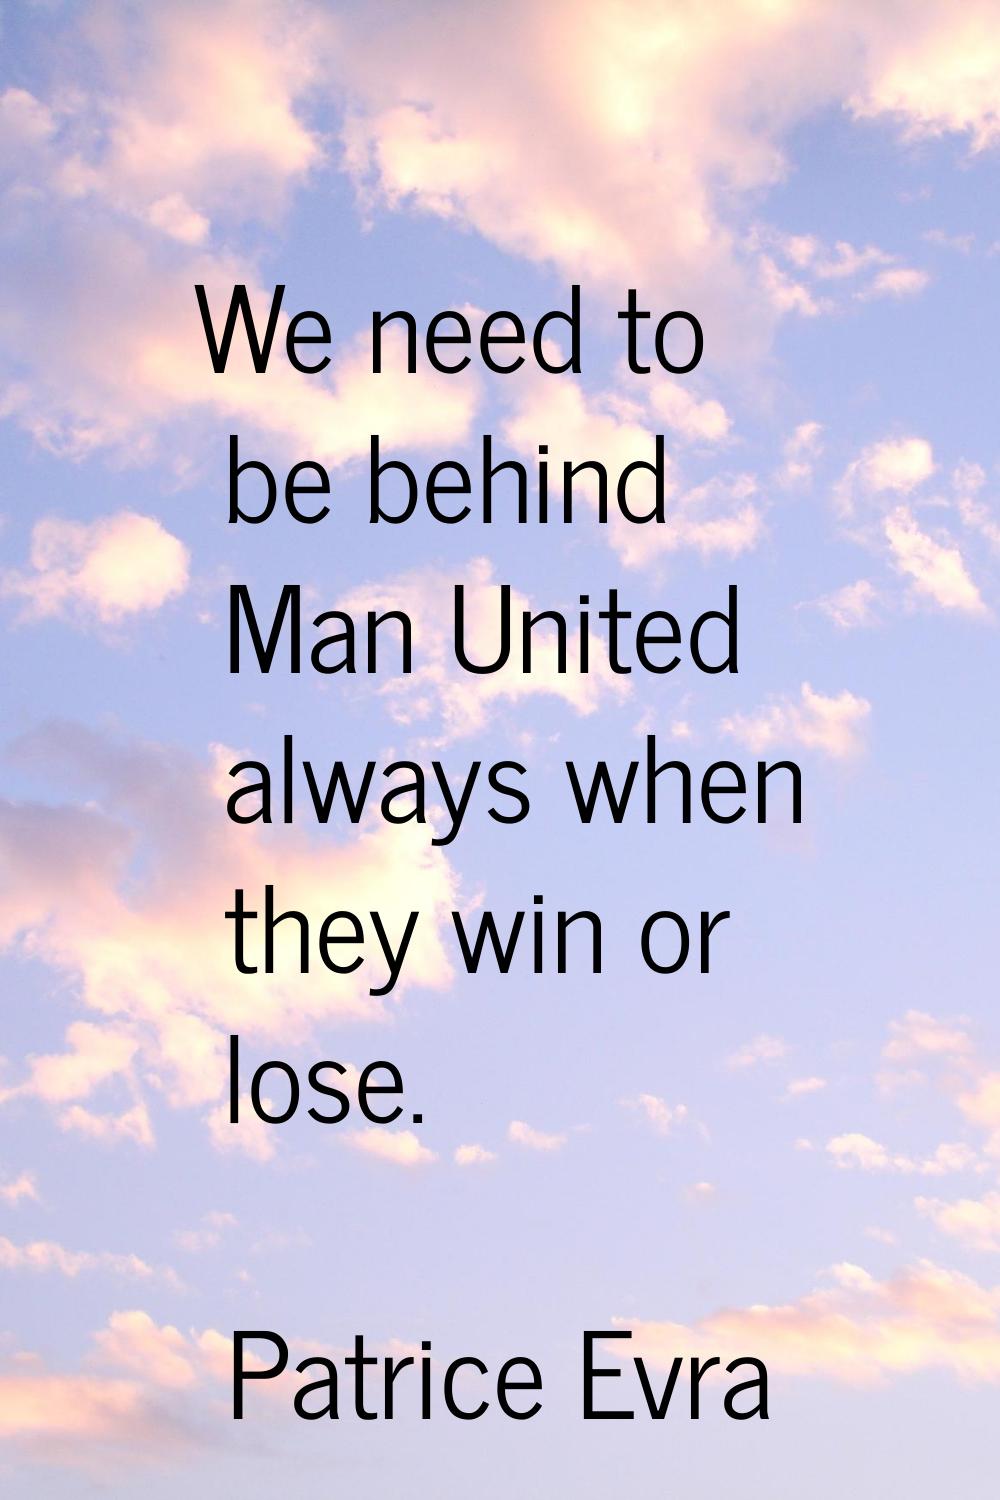 We need to be behind Man United always when they win or lose.